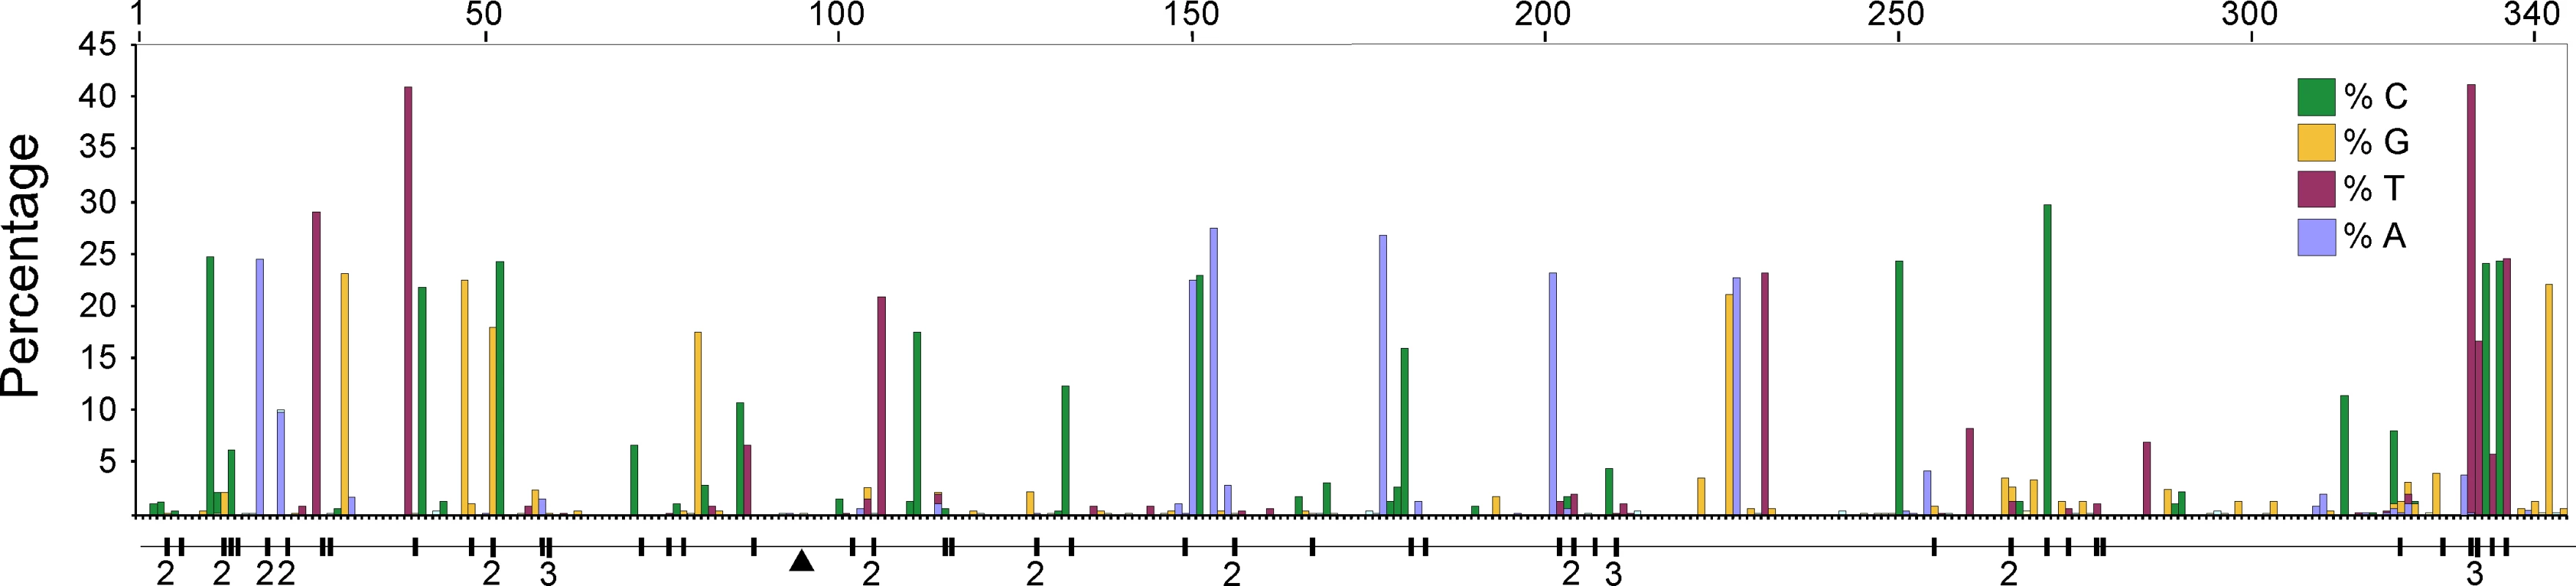 A plot of the frequency of the non-majority nucleotide bases across the 344 bp region of the HVR I for all adult penguins examined in this study.